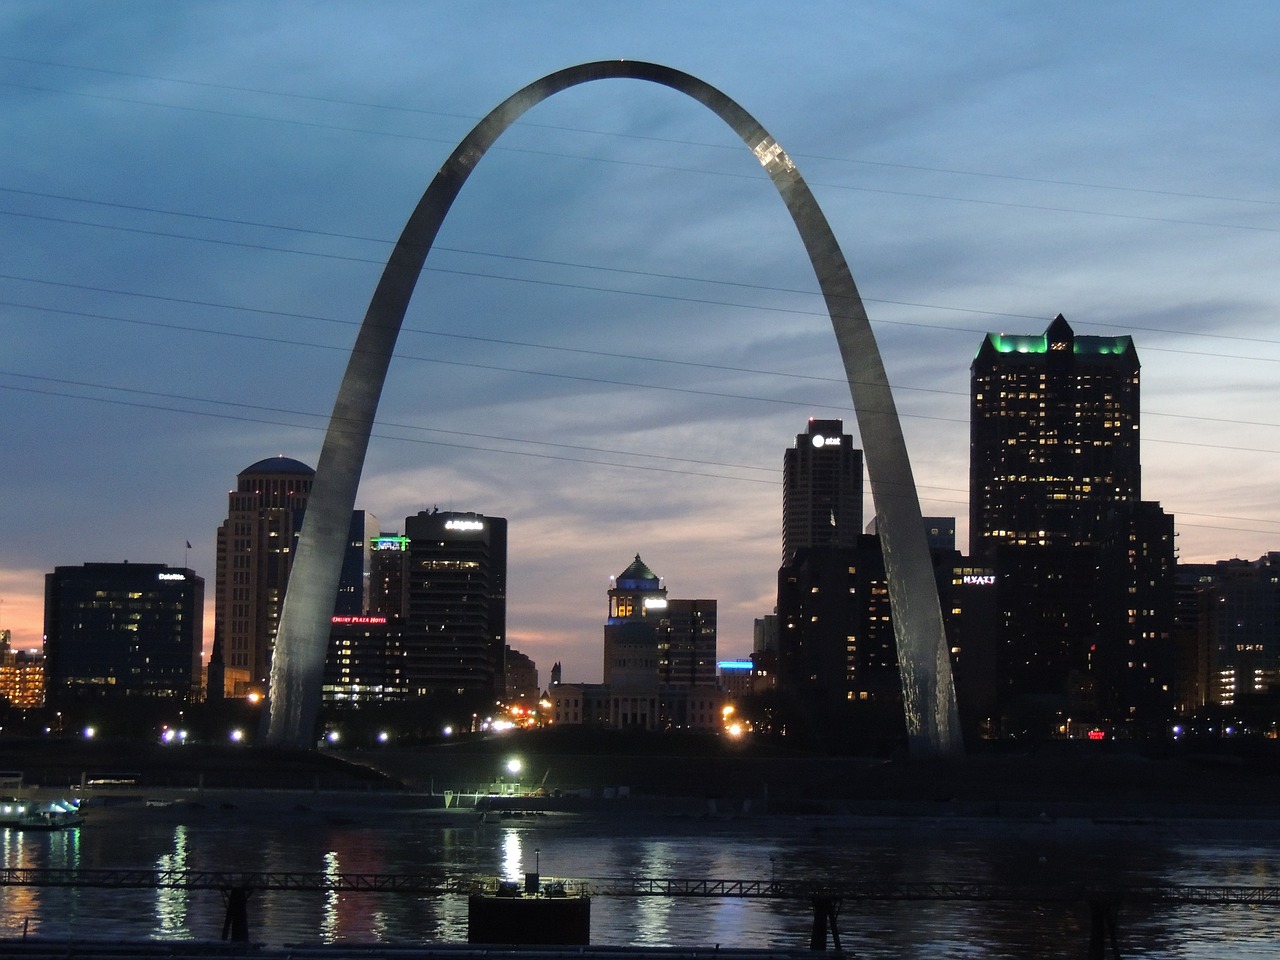 3-Day St. Louis Adventure with a Mix of History, Food, and Fun